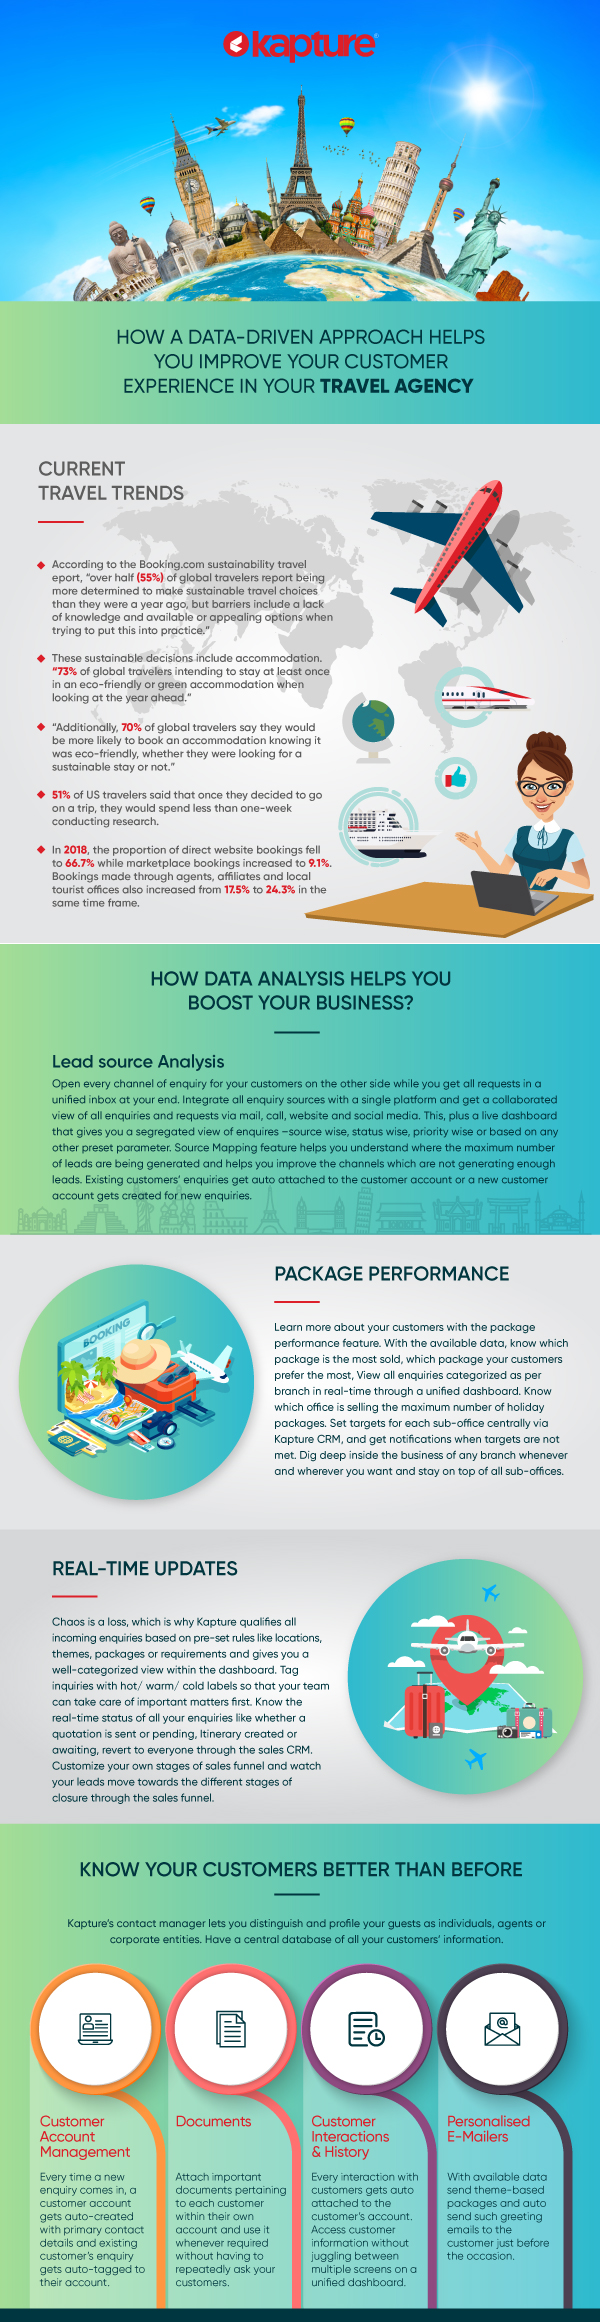 How a Data Driven Approach Helps You Improve Your Customer Experience In Your Travel Agency